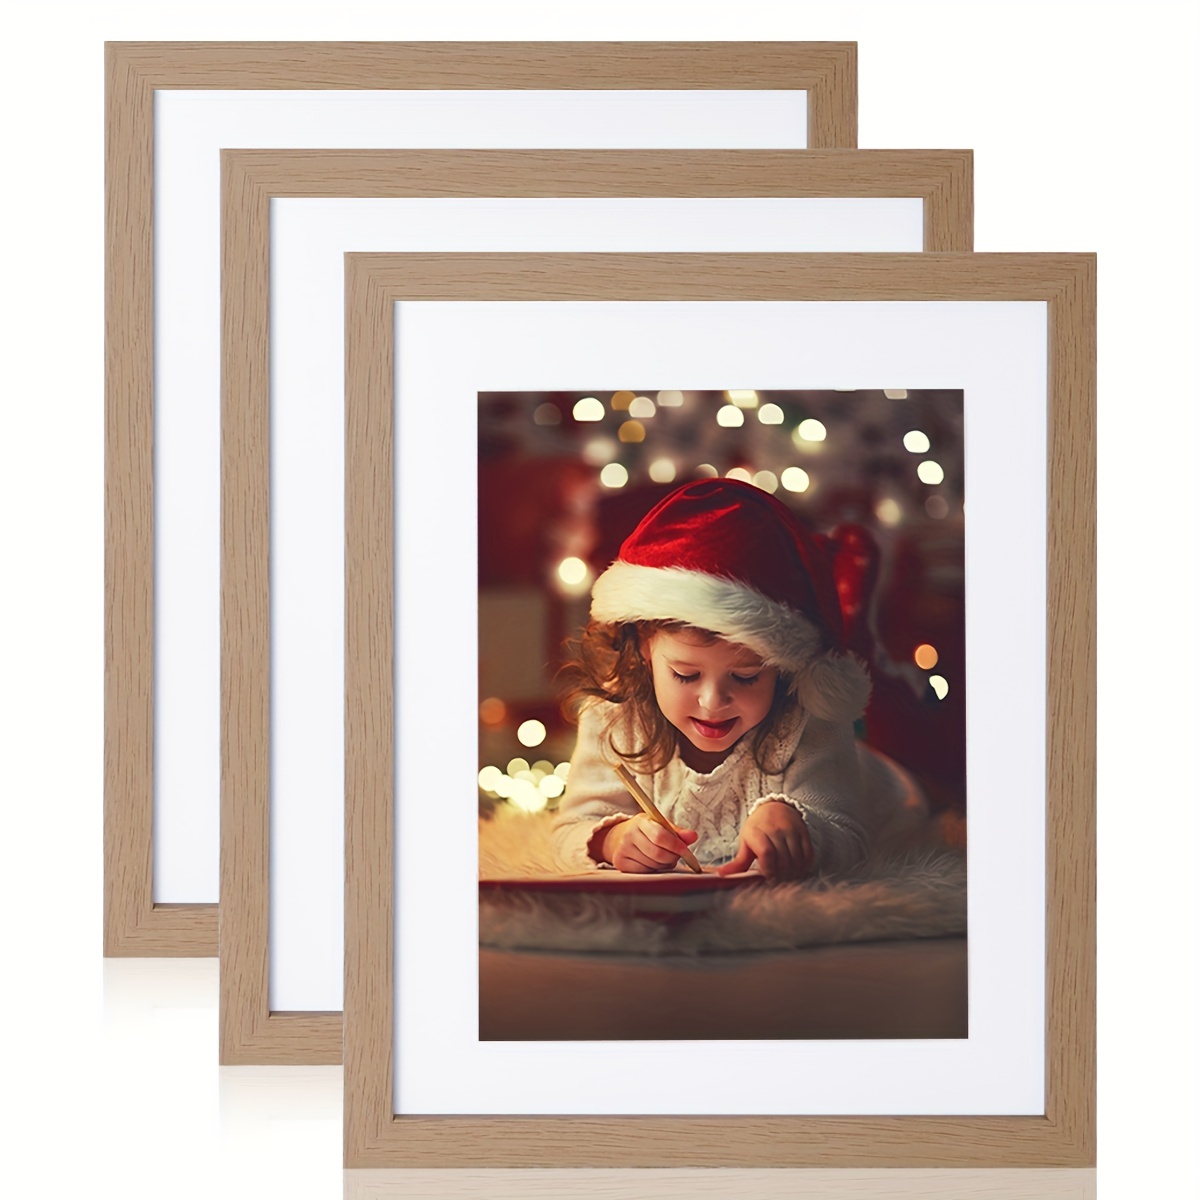 Photo Frames, Portrait Picture Frame, Matting, Picture Gallery